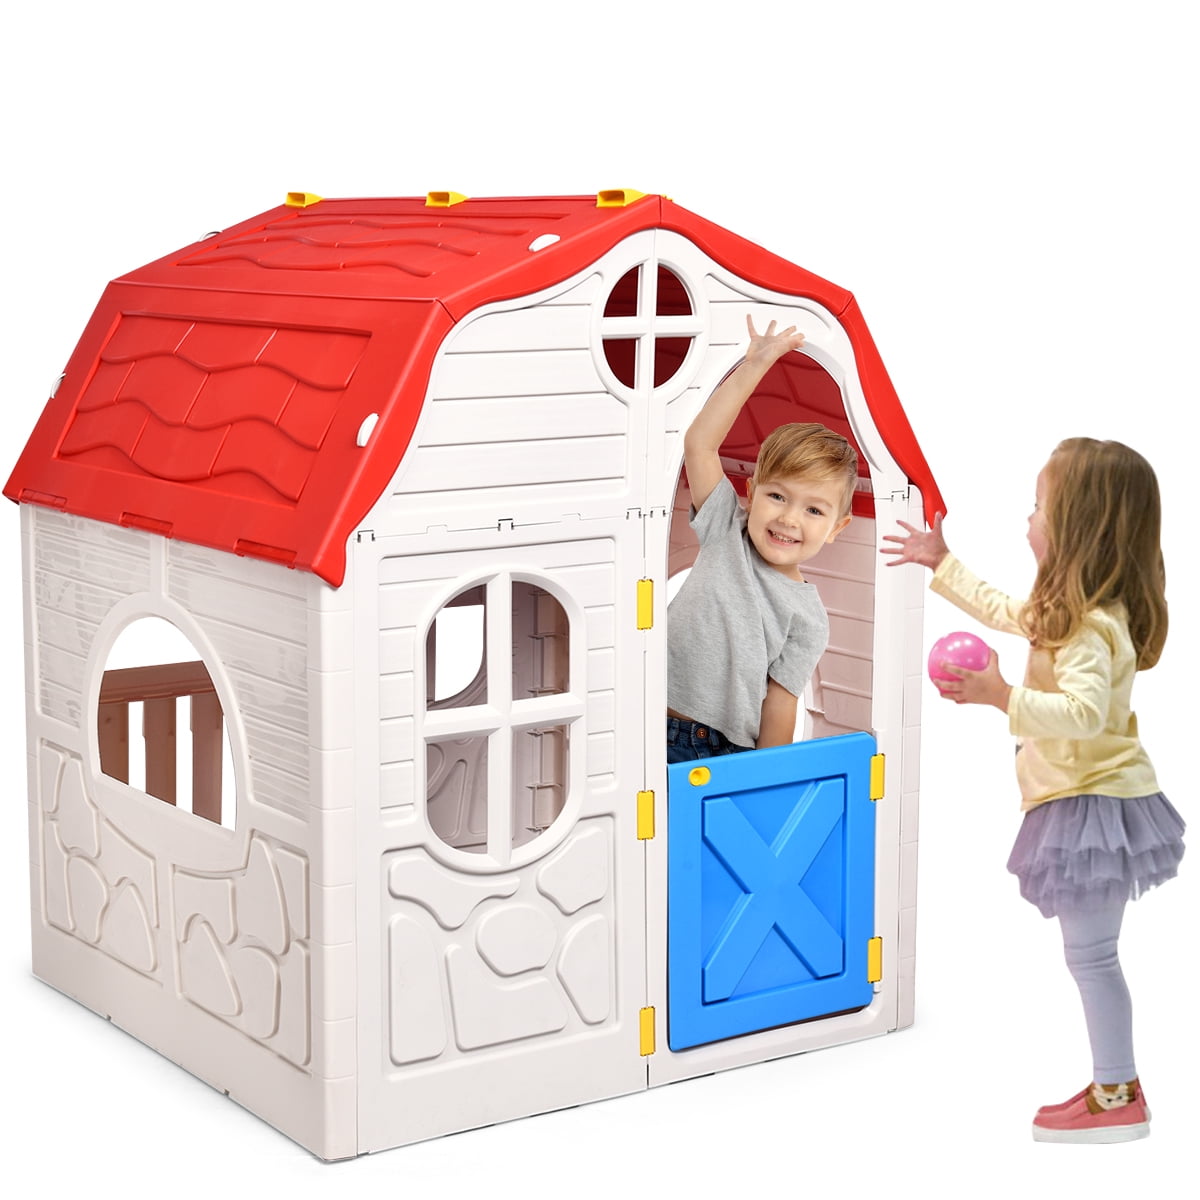 Kids Cottage Playhouse Foldable Plastic Play House Portable for Indoor & Outdoor 